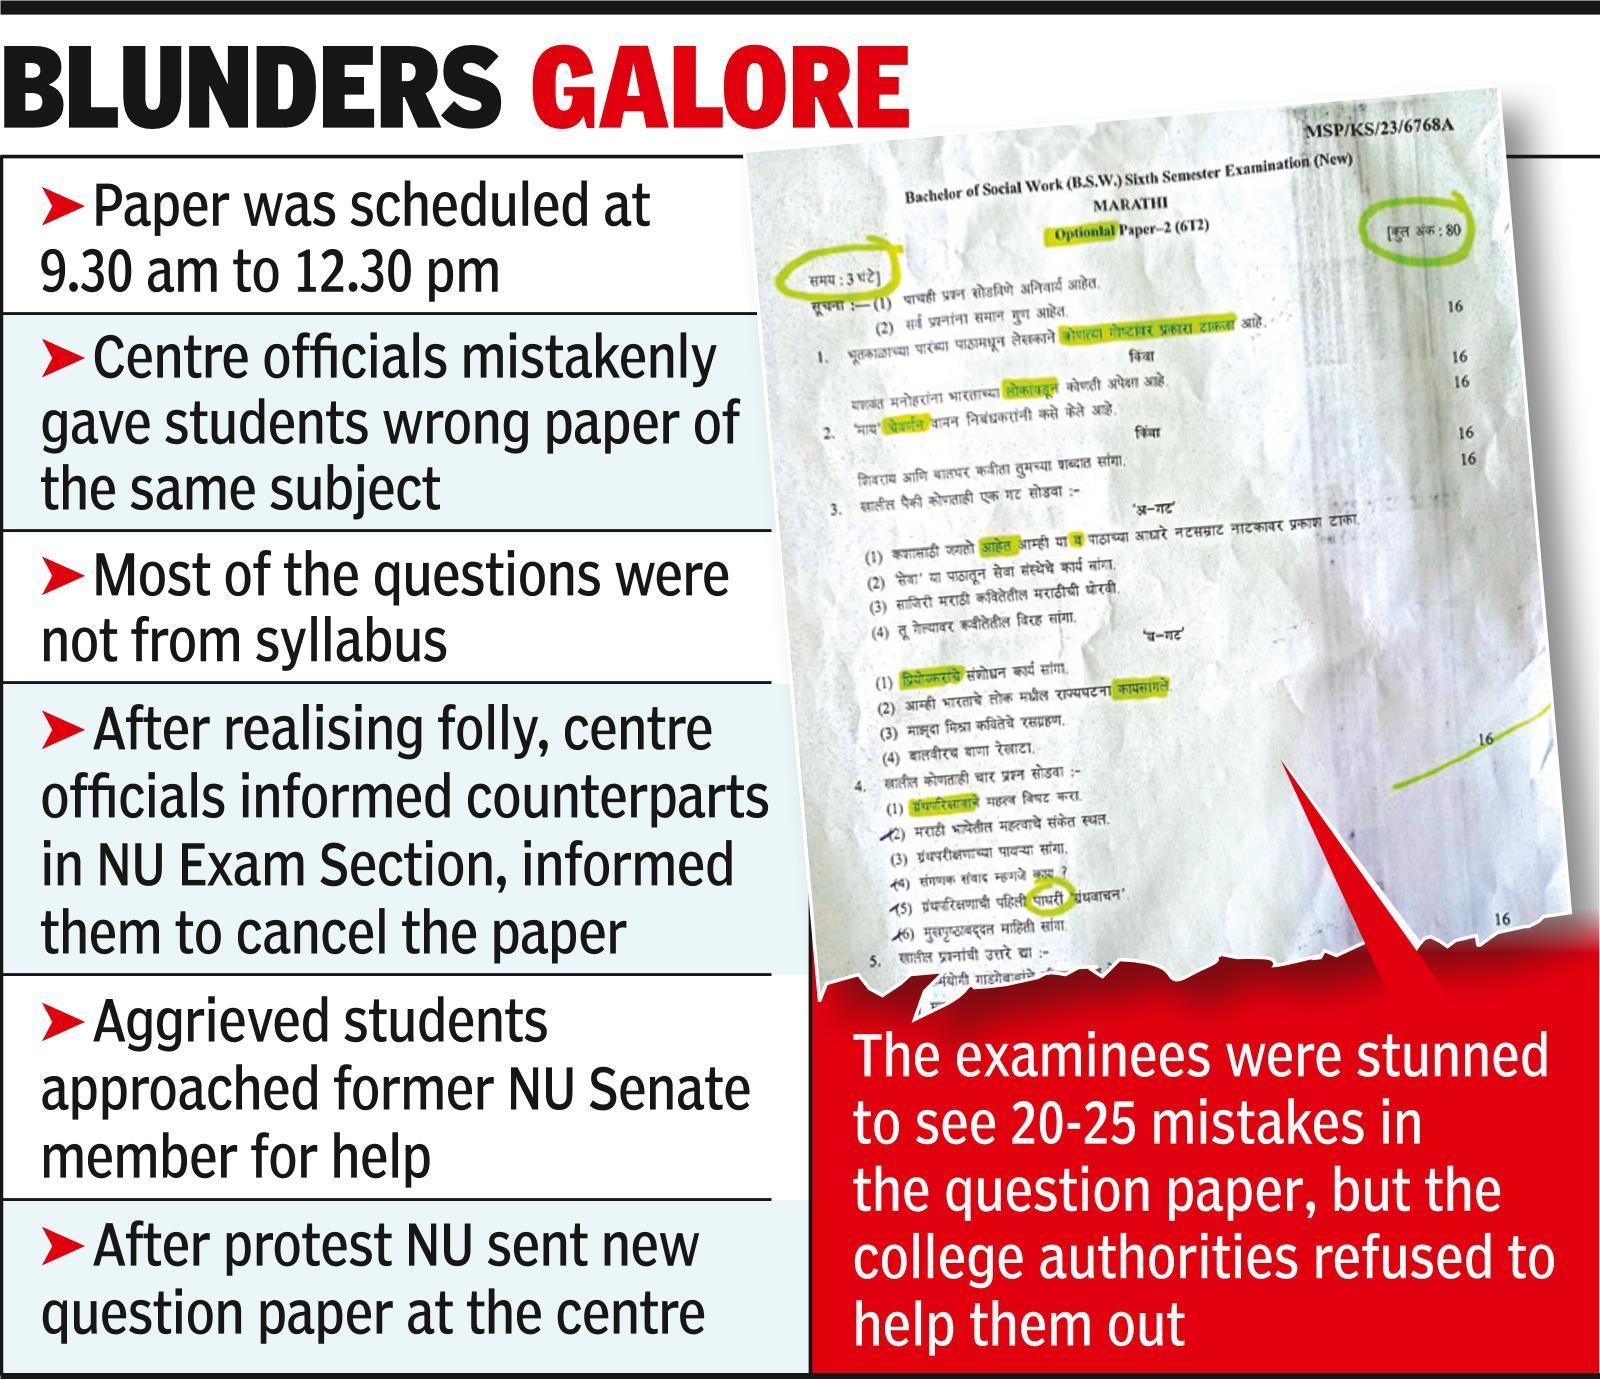 NU students see red over glaring mistakes in BSW question paper